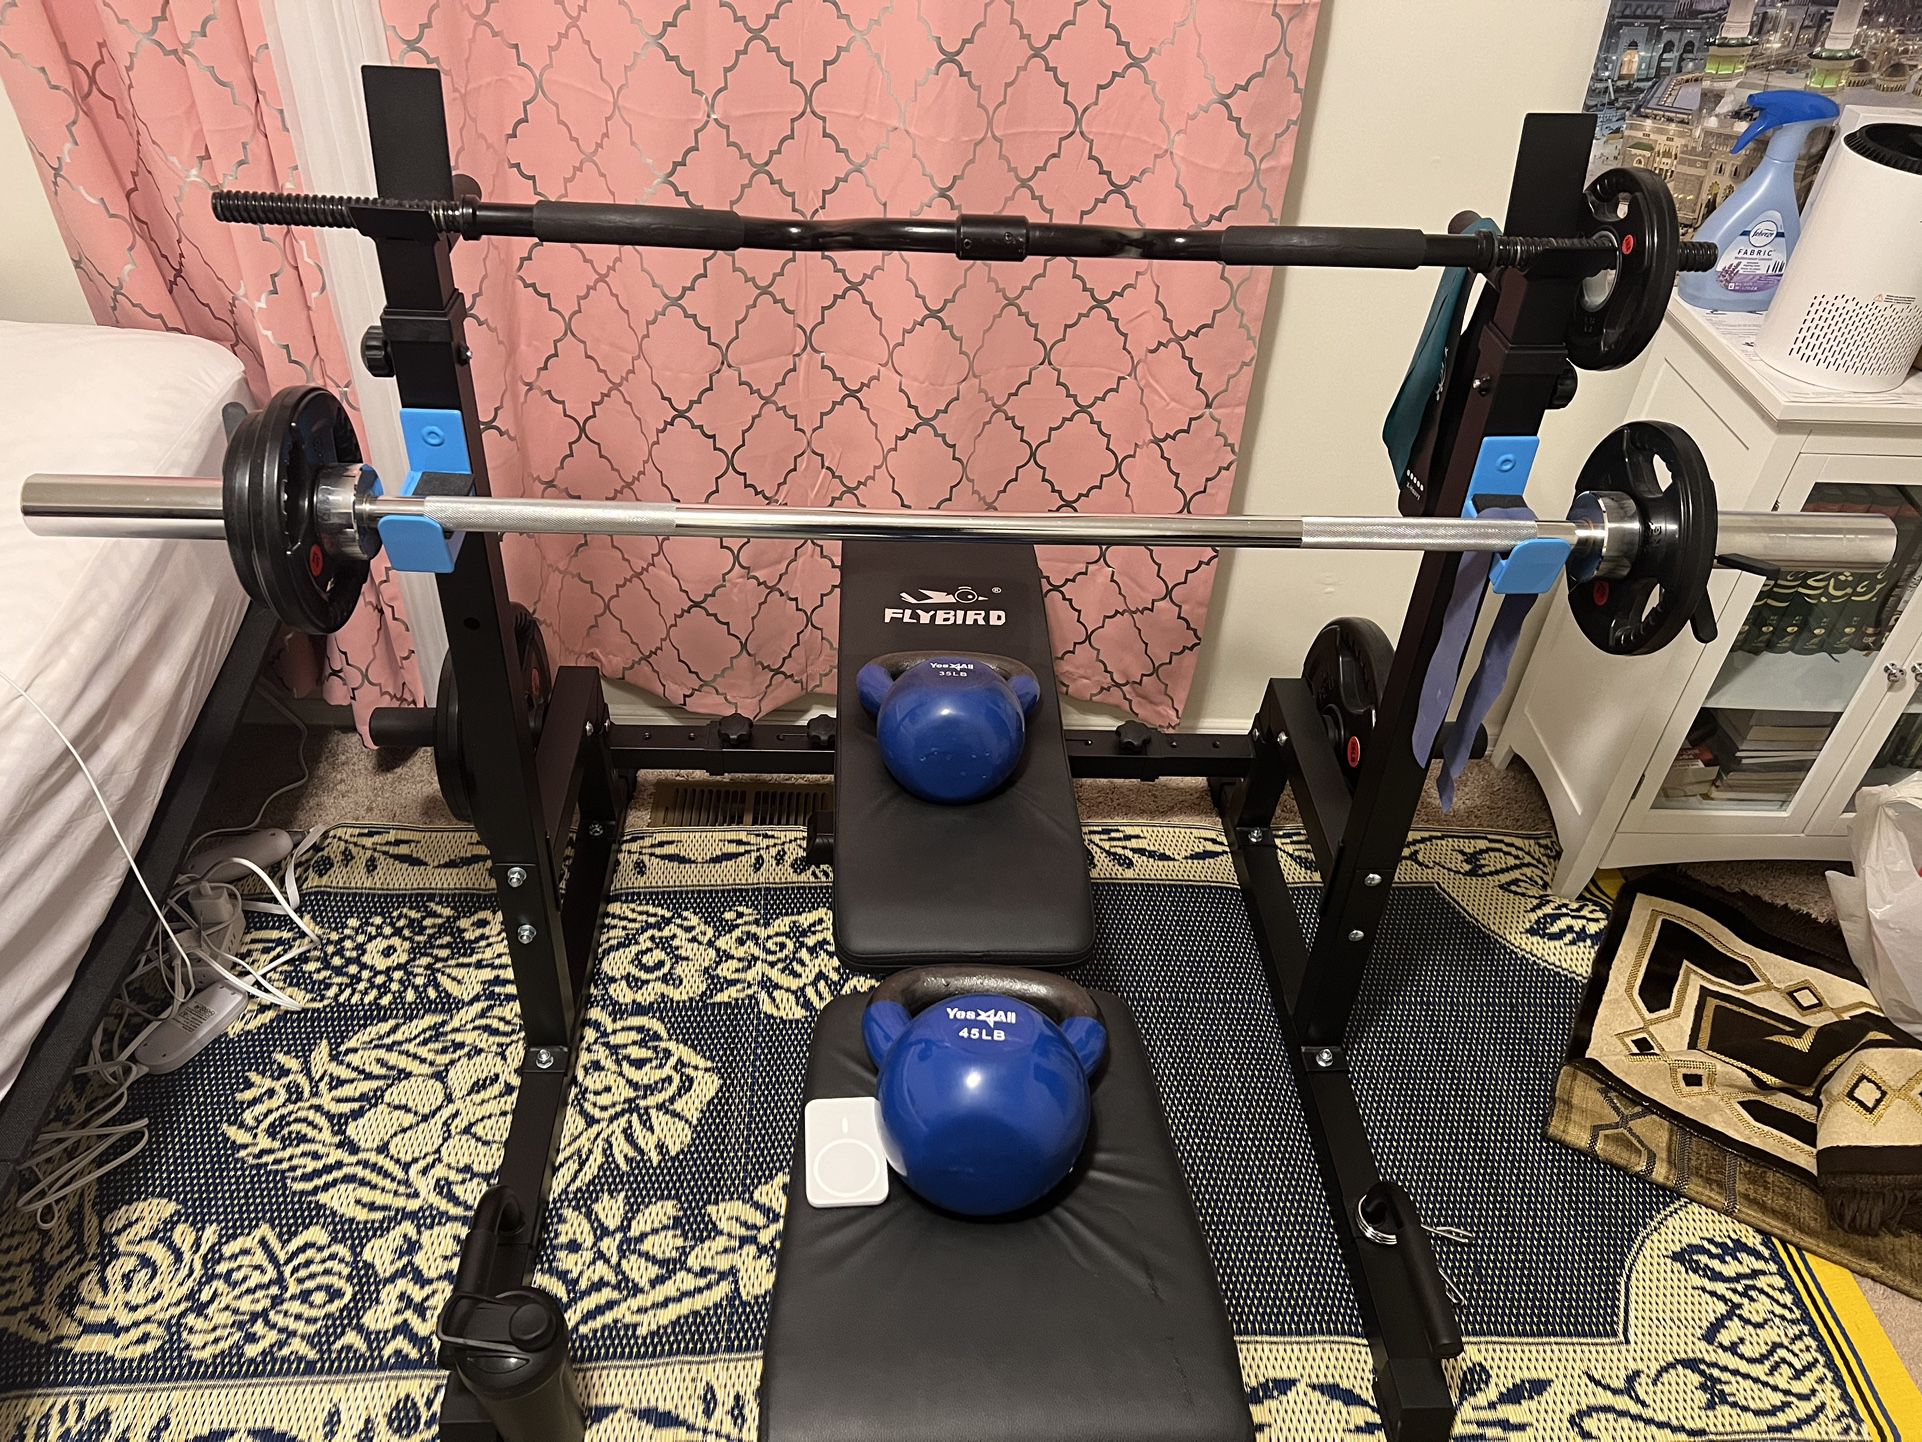 Squat Rack, Weight Plat, Bench, Barbell Set with Extra Another Barbell.